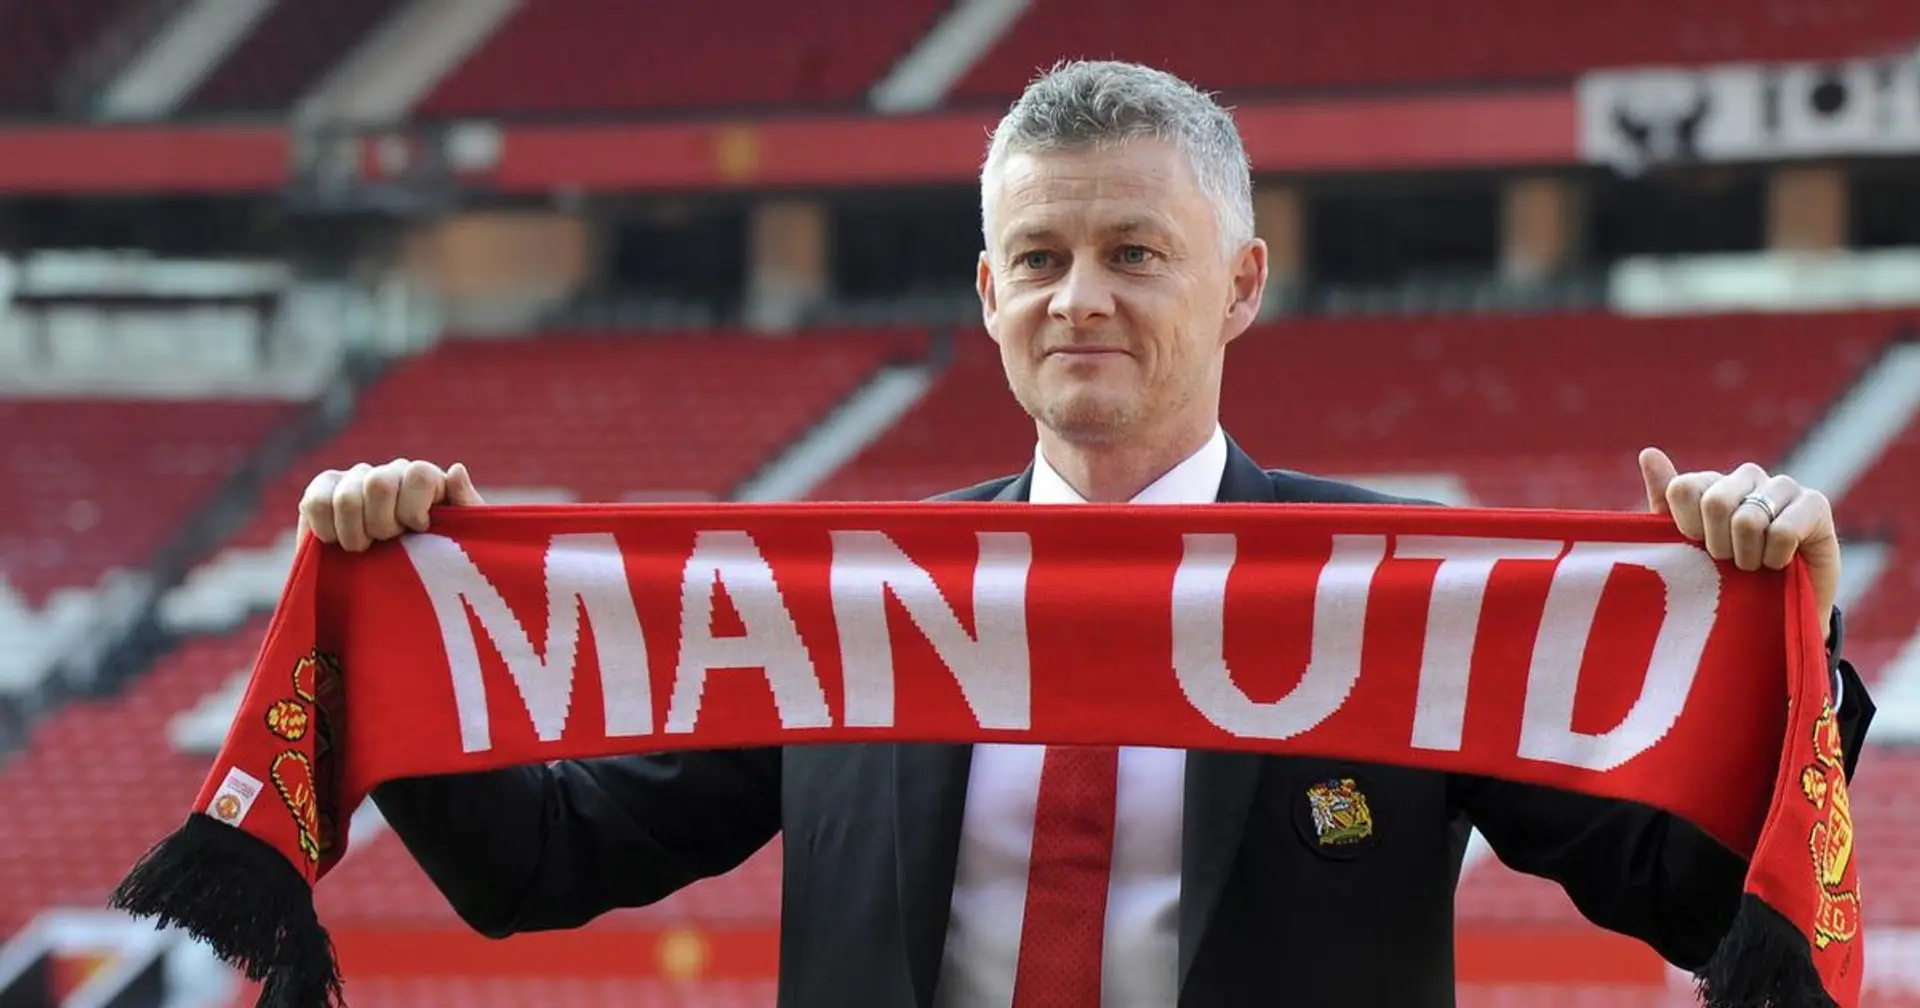 Top 4 ideas for a blog post topic: What 2020/21 holds for United, transfer business & more